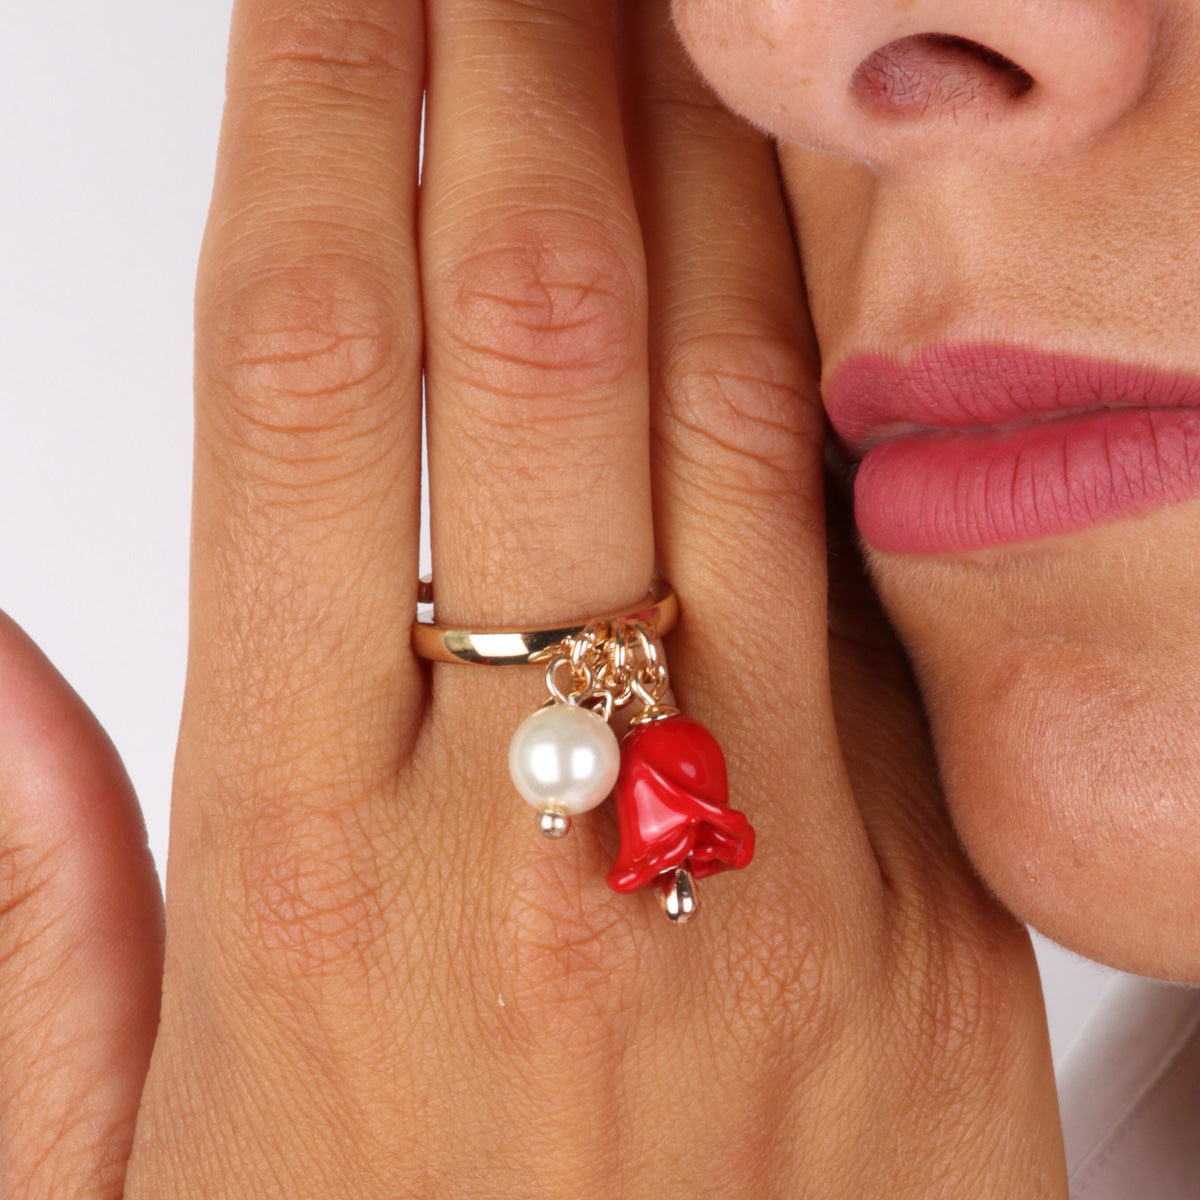 Metal ring with pearl and rose -shaped bell embellished with colored glazes